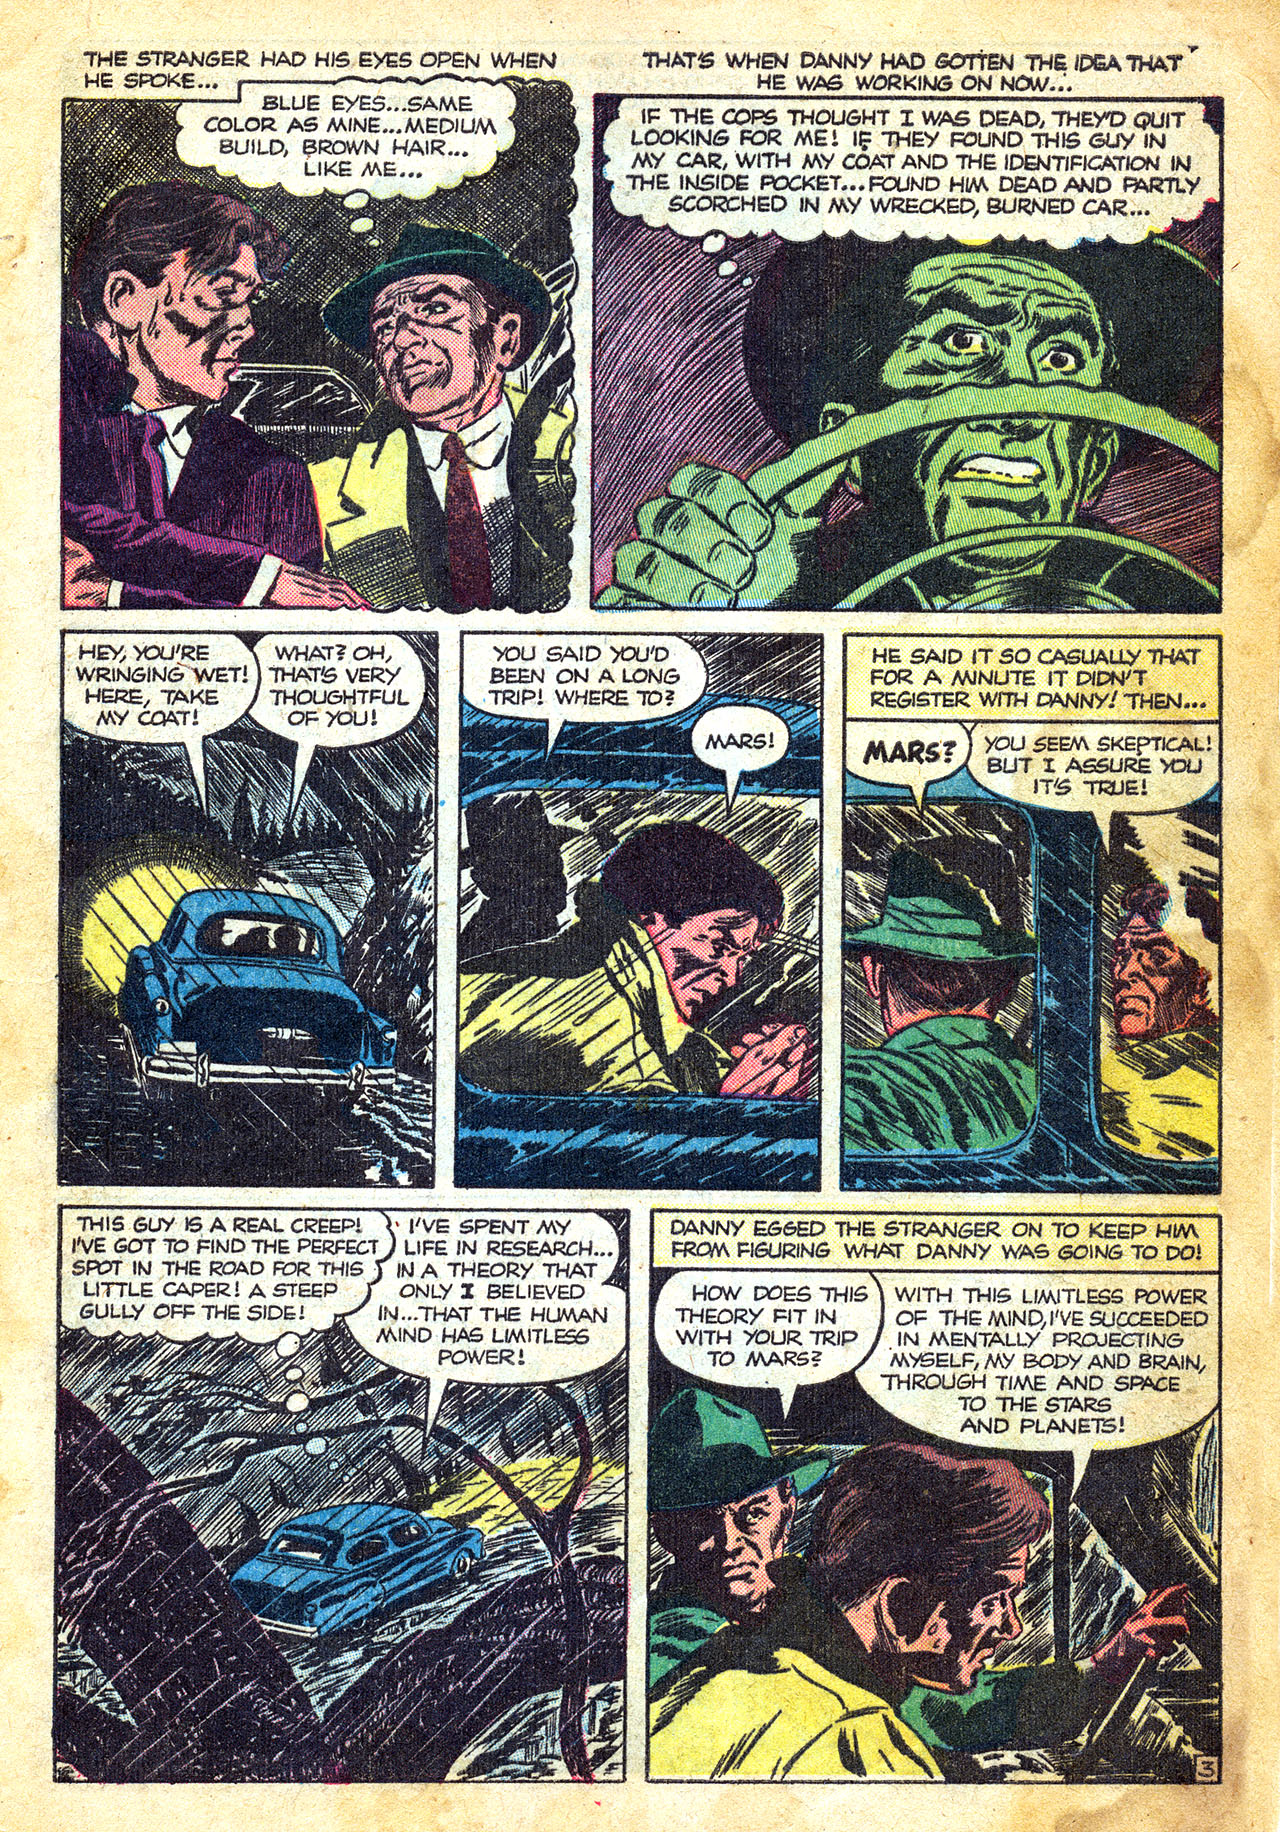 Marvel Tales (1949) 123 Page 4